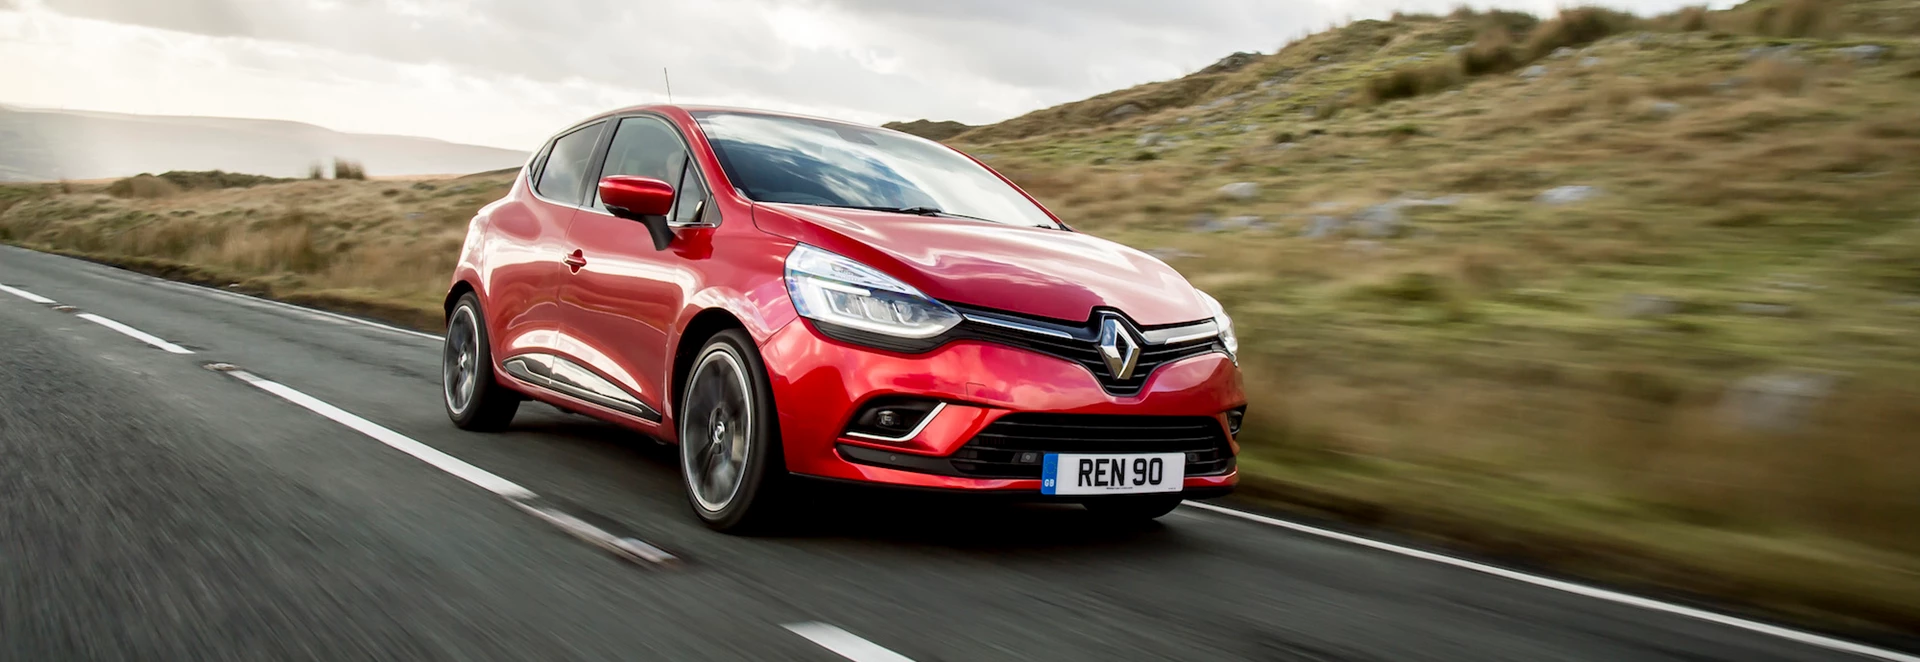 Renault offers limited discount on Twingo, finance deals on Clio